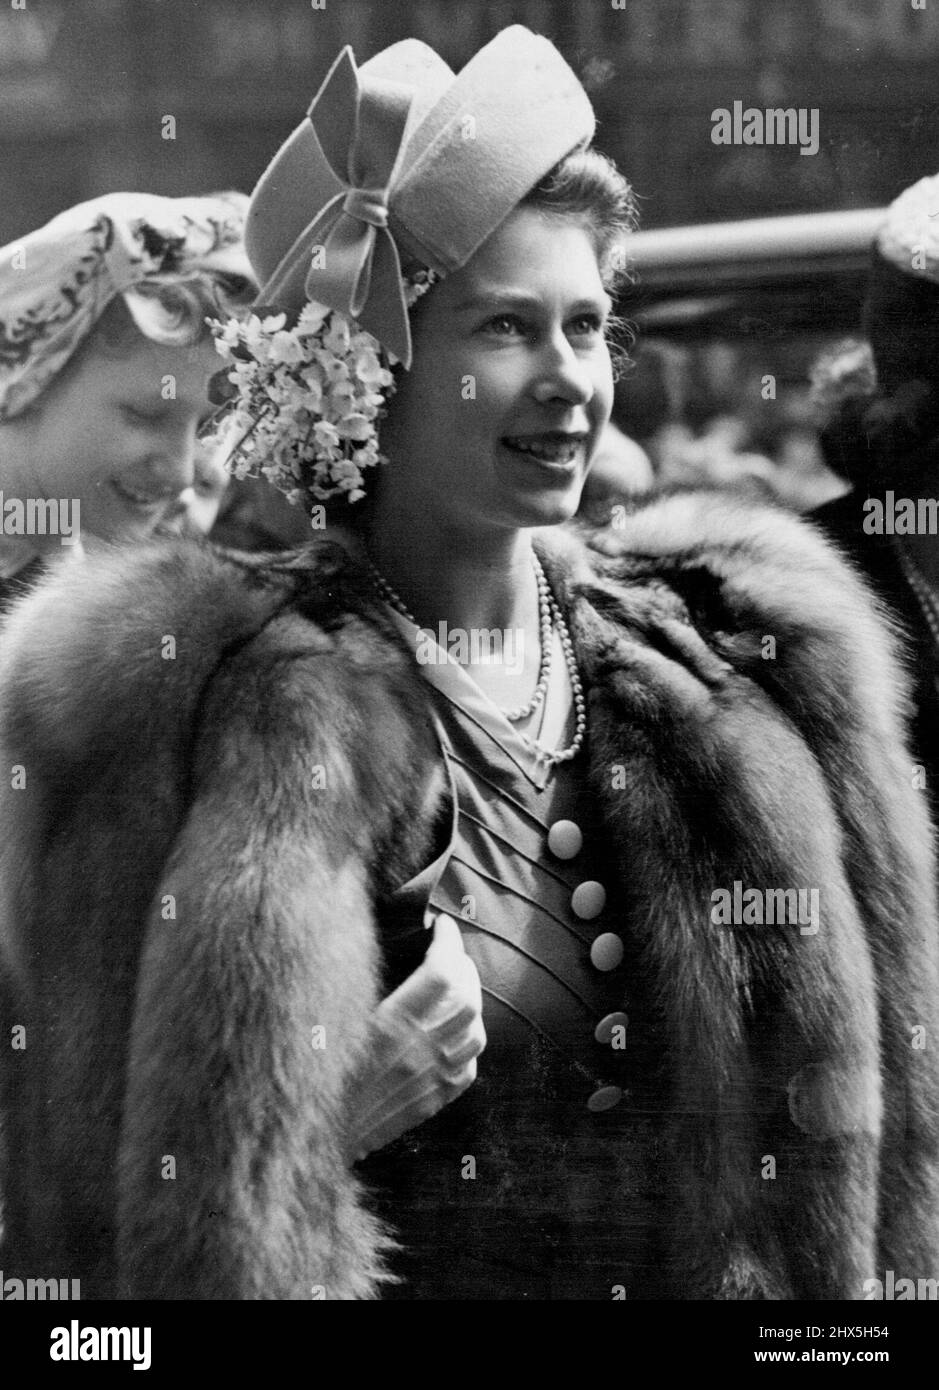 Princess Elizabeth At Children's Hospital - Attends Court of Governors. Princess Elizabeth as she arrived at the Hospital. Princess Elizabeth paid a visit to the Queen Elizabeth Hospital for Children at Hackney, London, to attend the annual Court of Governors. May 22, 1947. Stock Photo